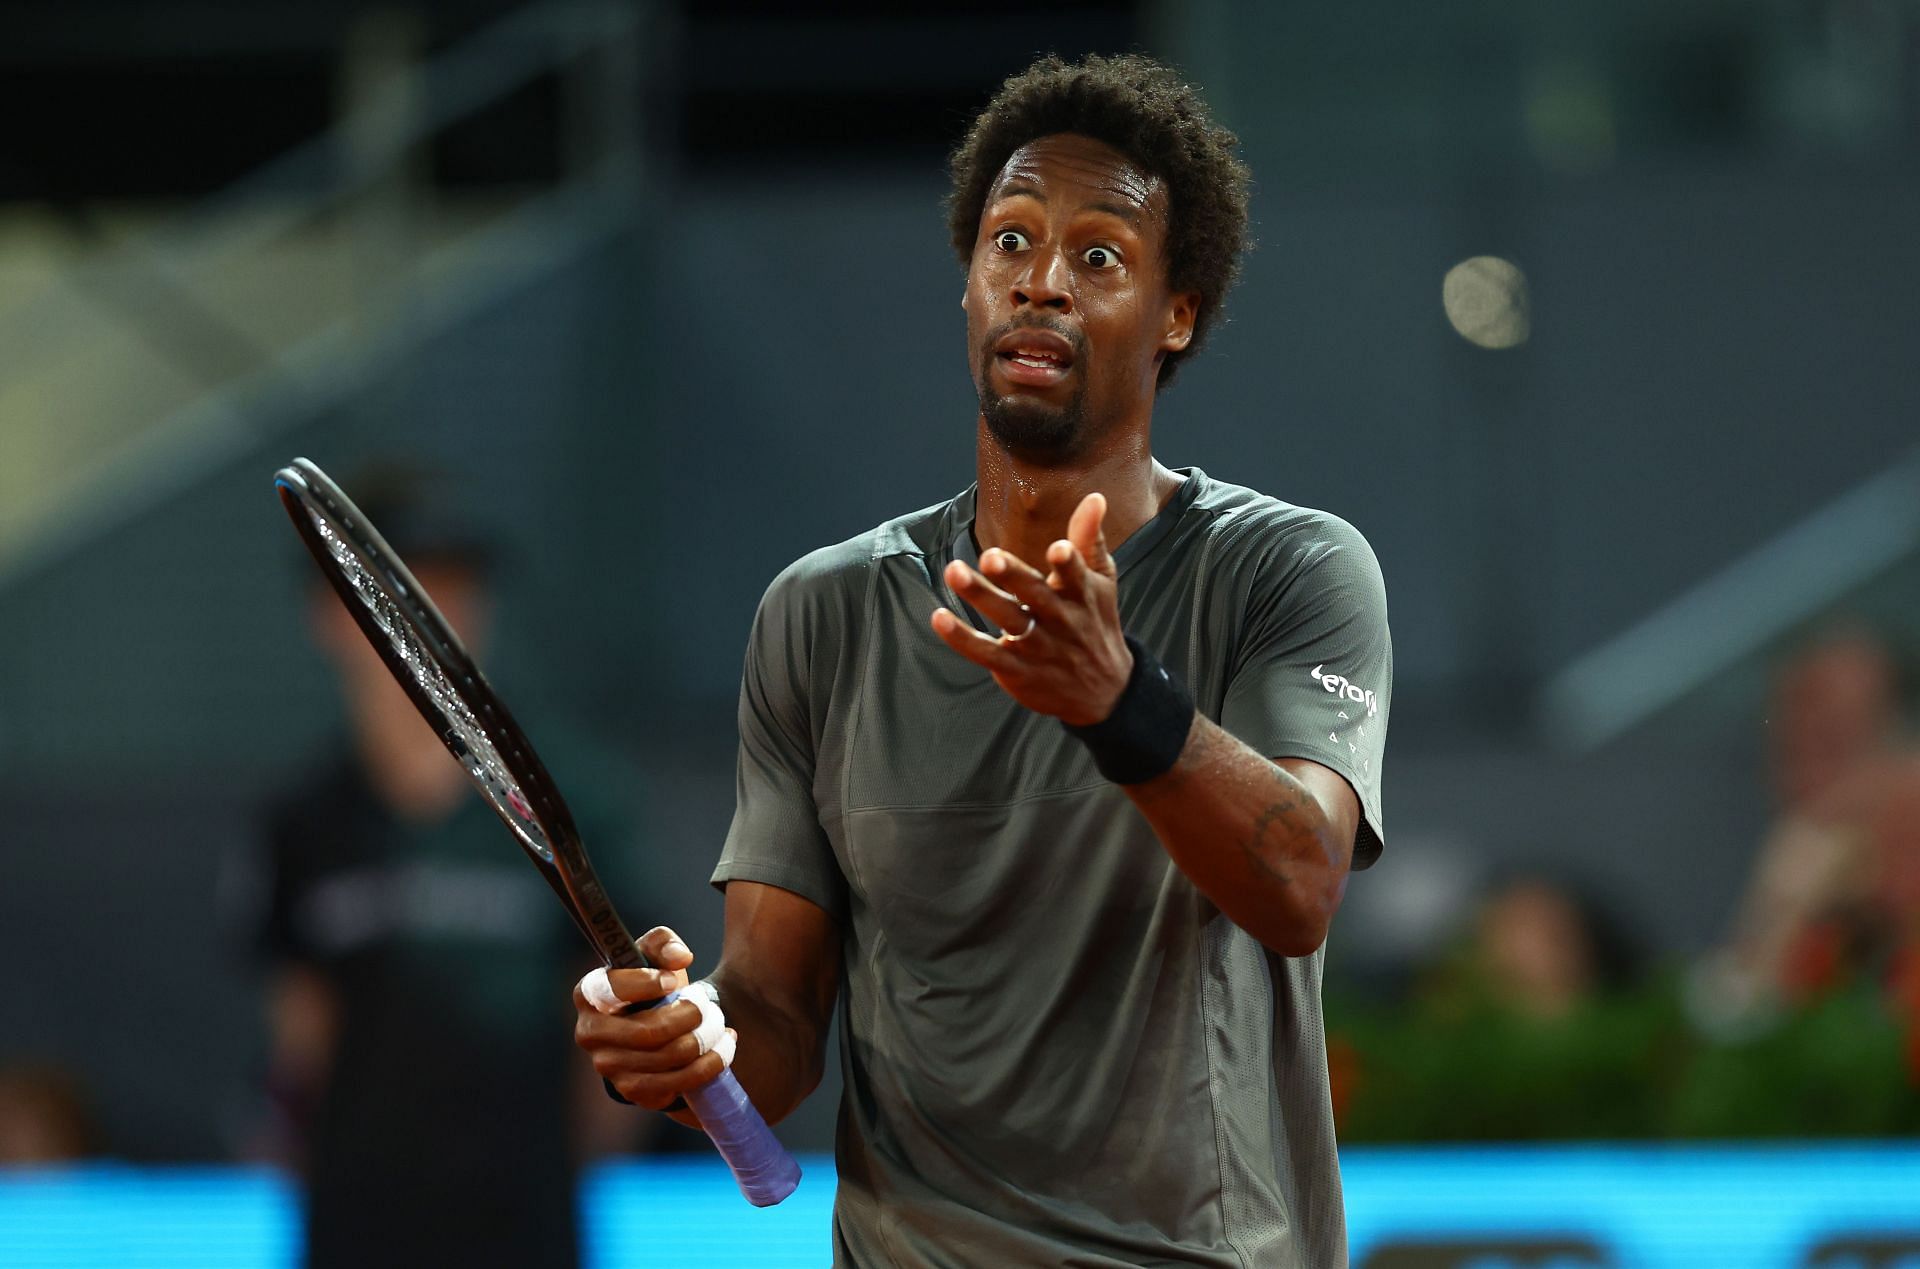 Gael Monfils in action at the Madrid Open